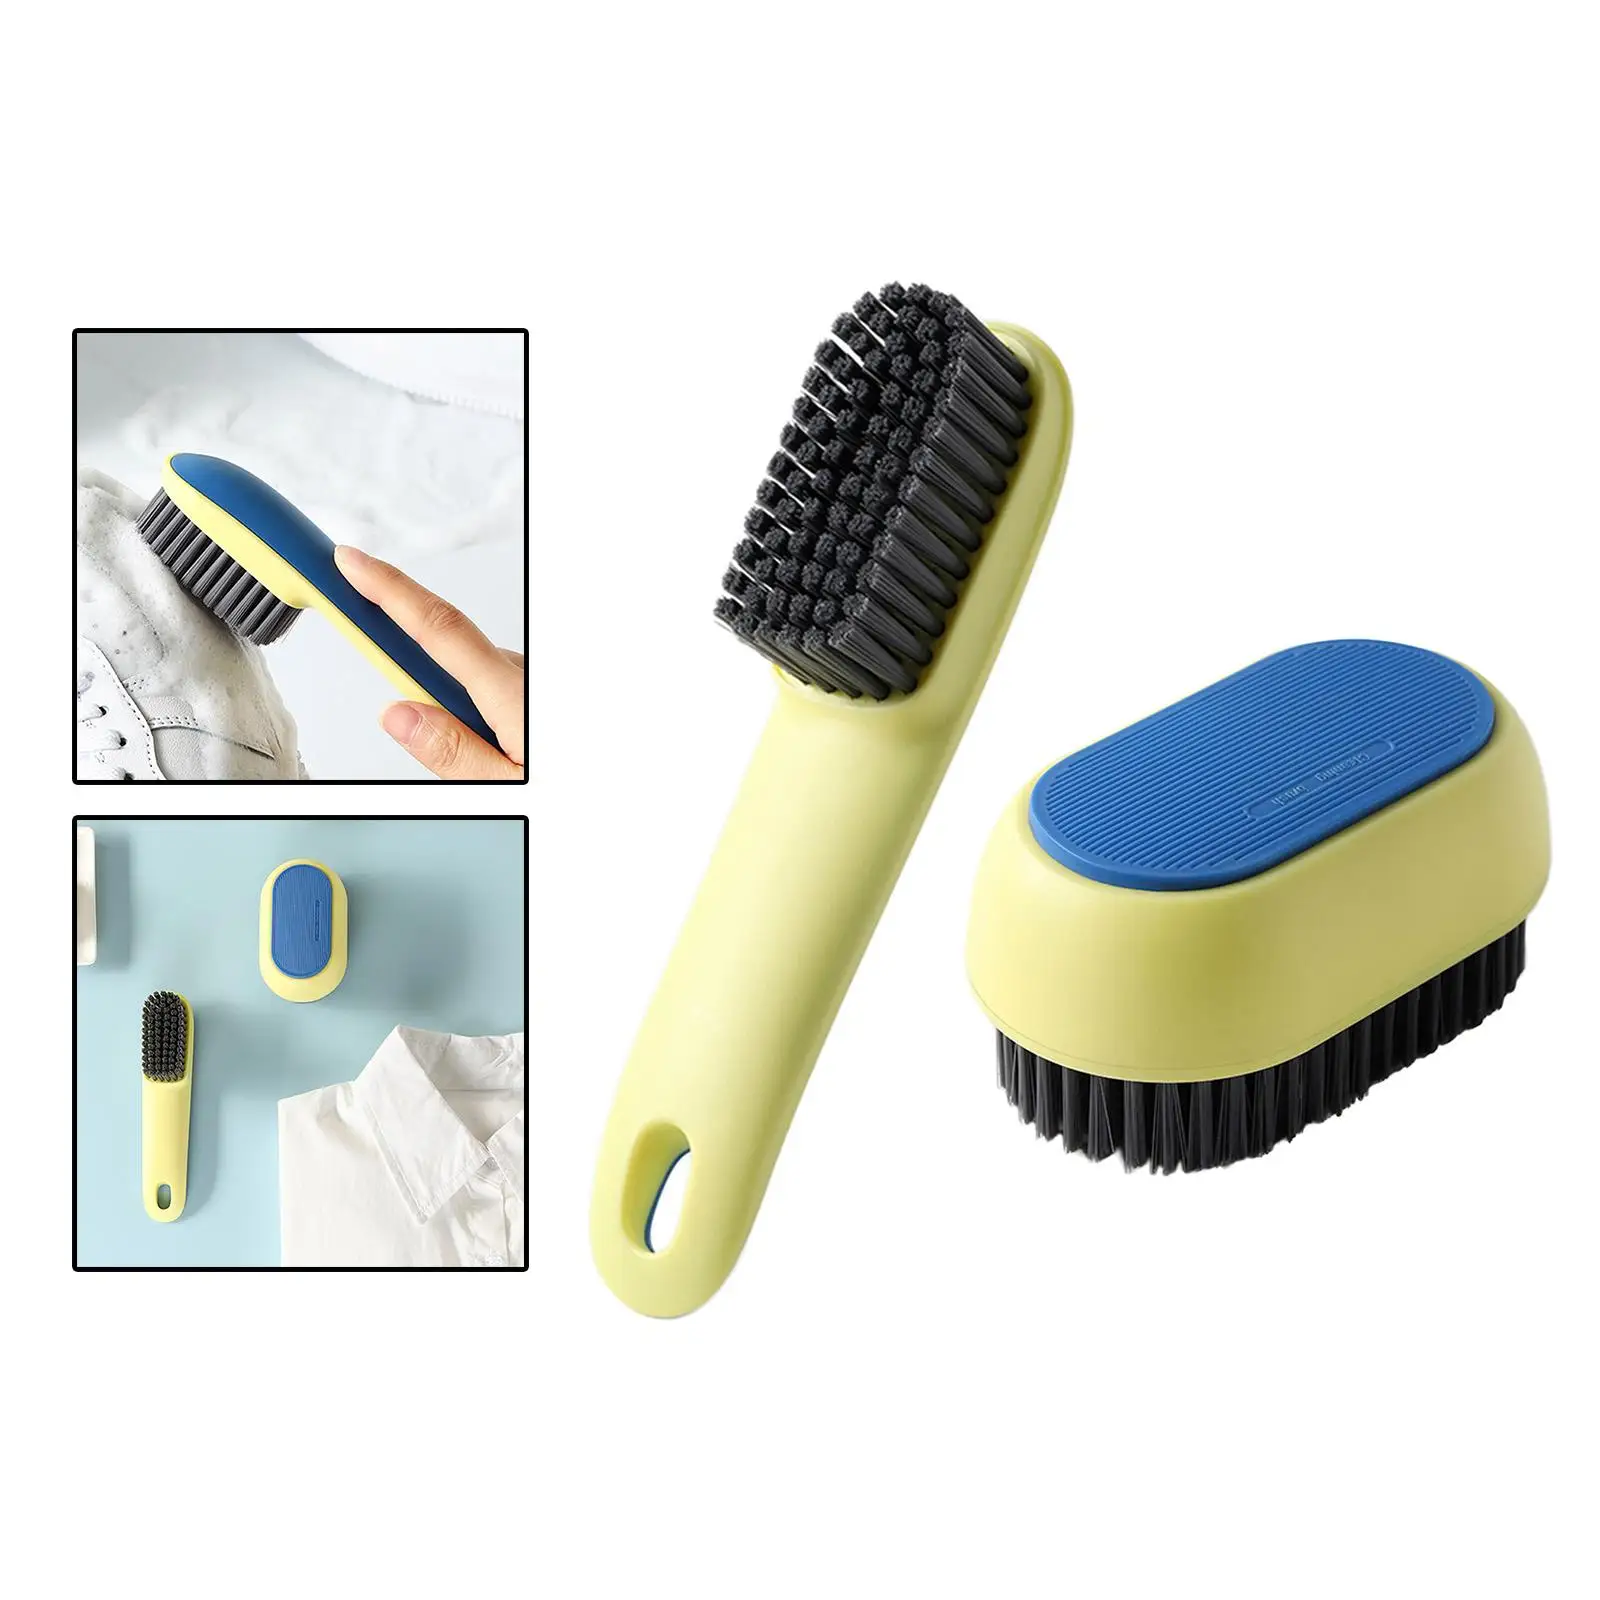 Multipurpose Shoe Brush Cleaner Cleaning Brush with Clothes Brush Cleaning Tools Shoe Shine Brush for Bathroom Travel Outdoor